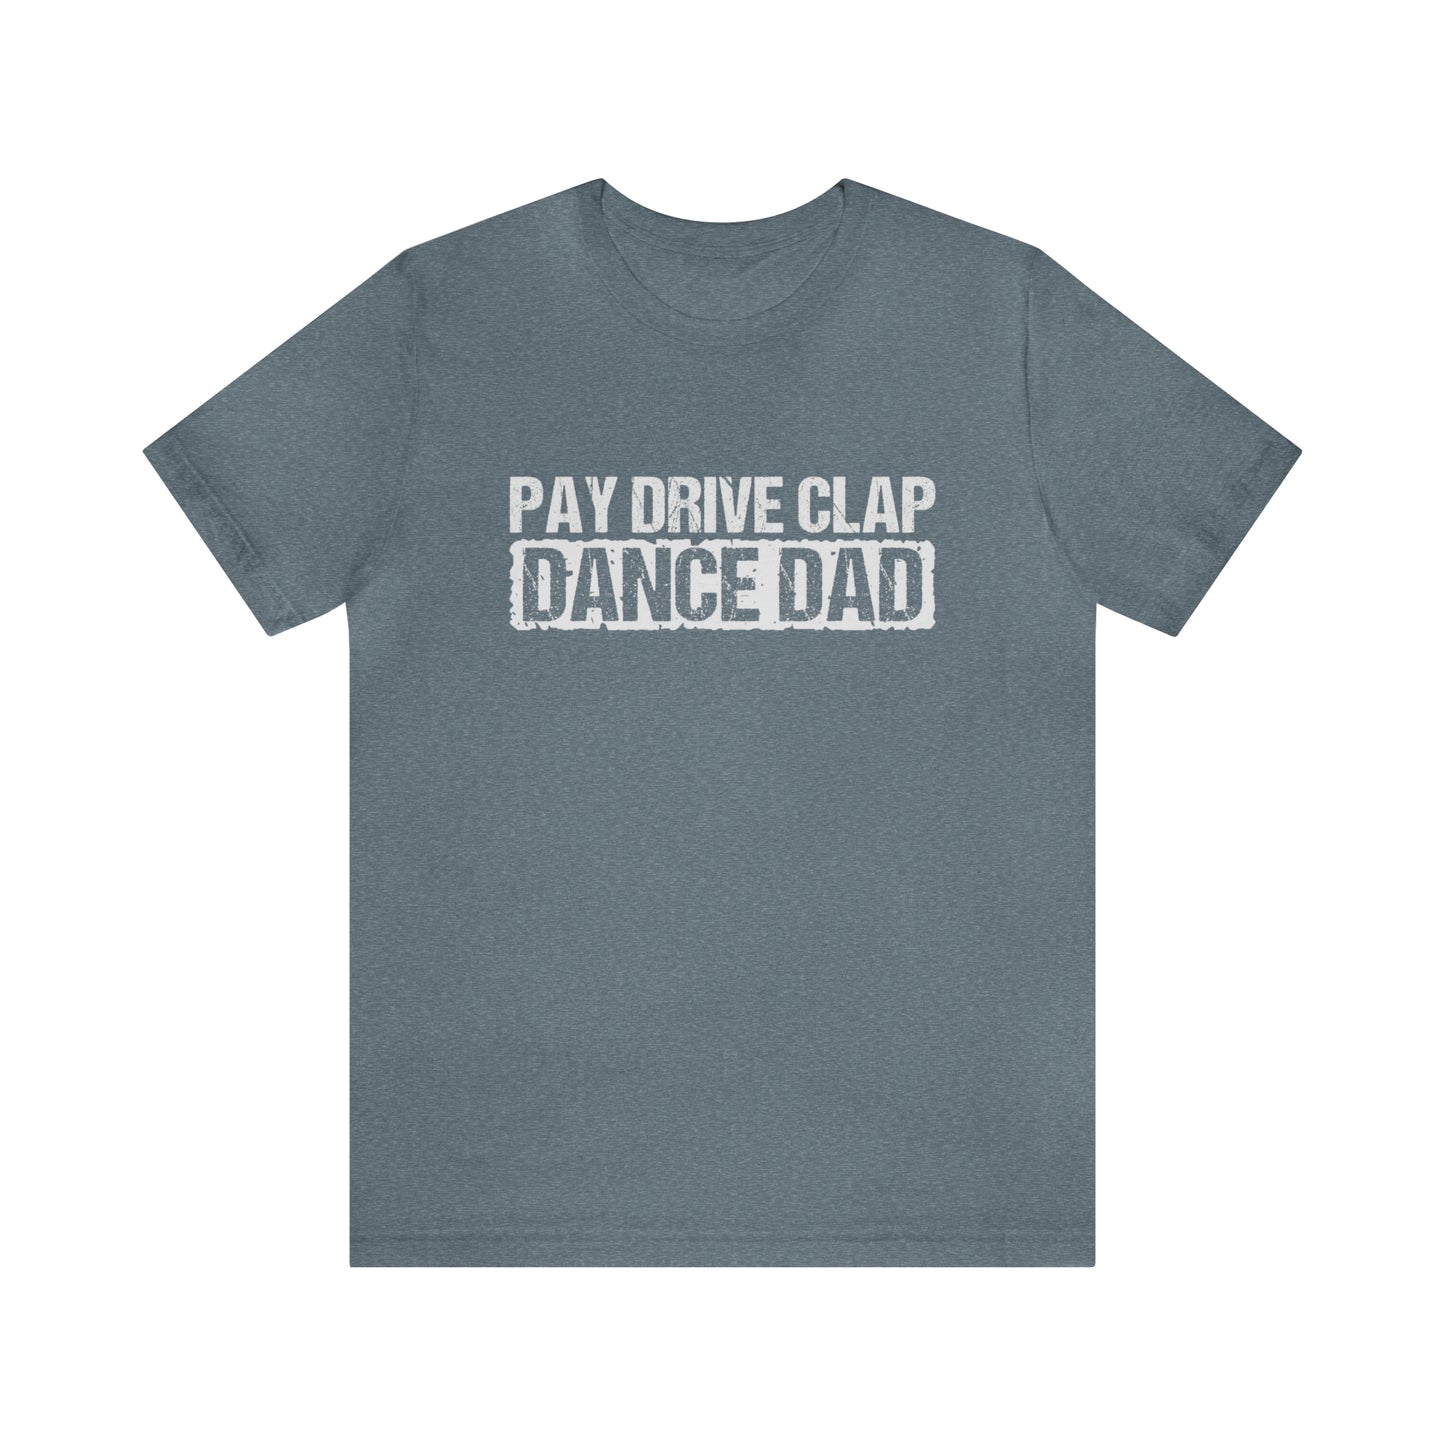 DANCE DAD pay drive clap Short Sleeve Unisex Adult Tee